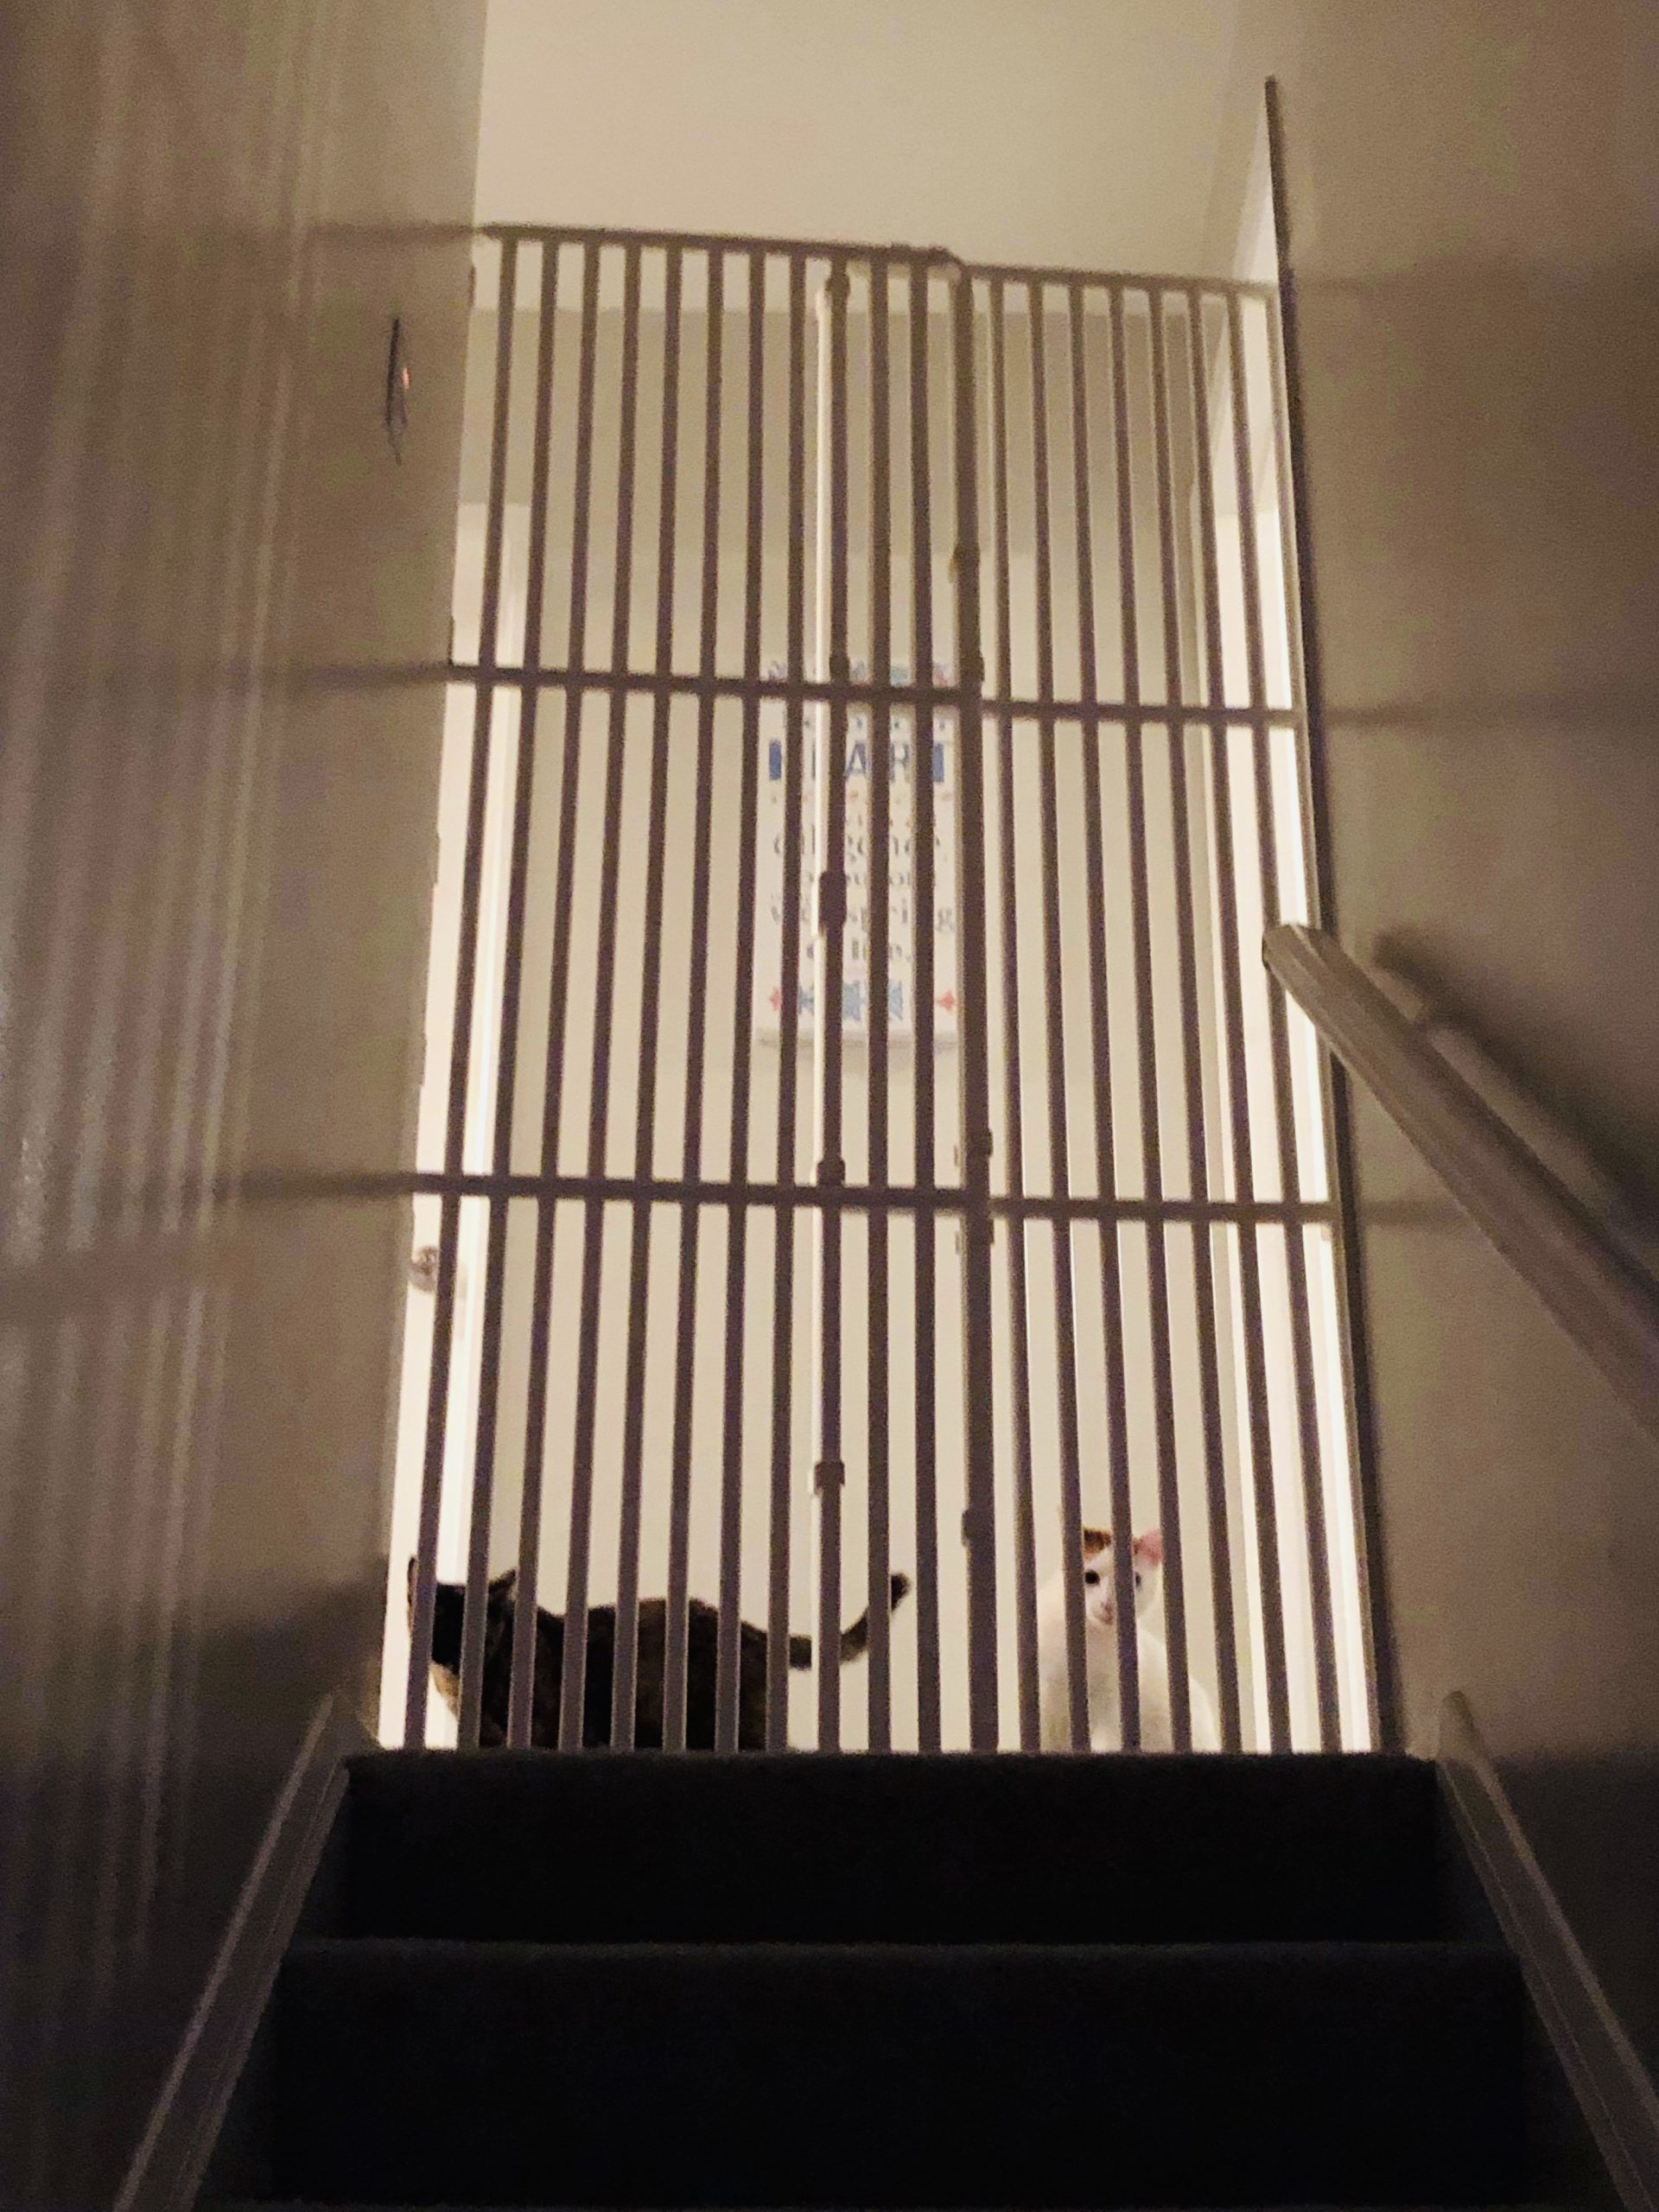 stair barrier for cats